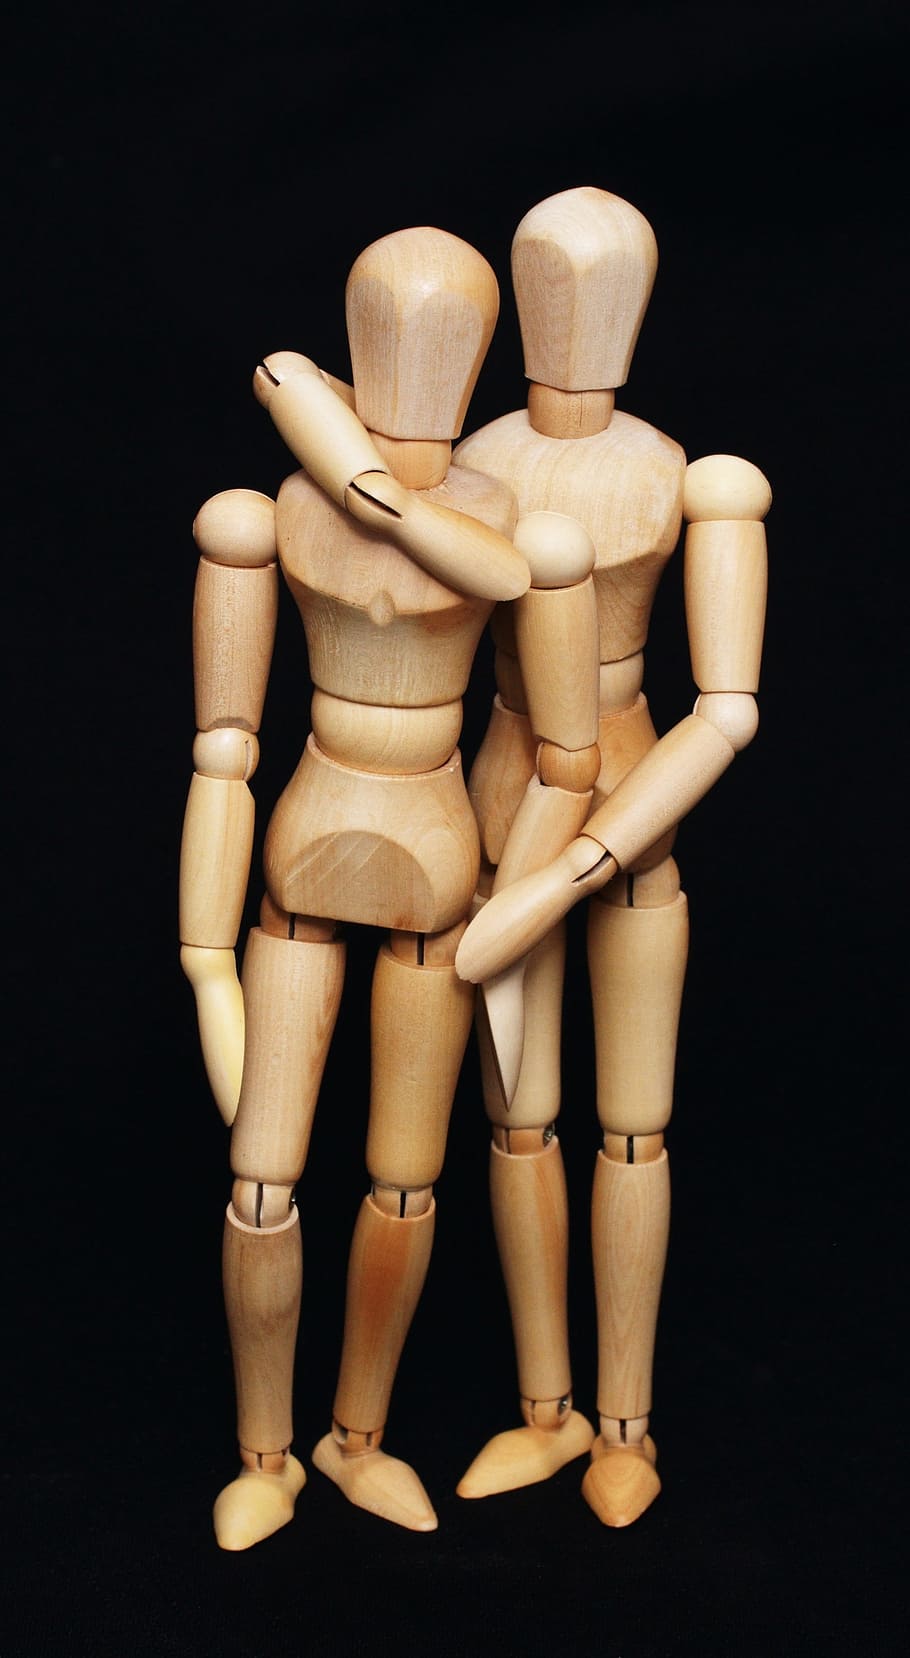 two, brown, wood dolls, human, wood, display dummy, friends, friendship, relationship, homosexuality